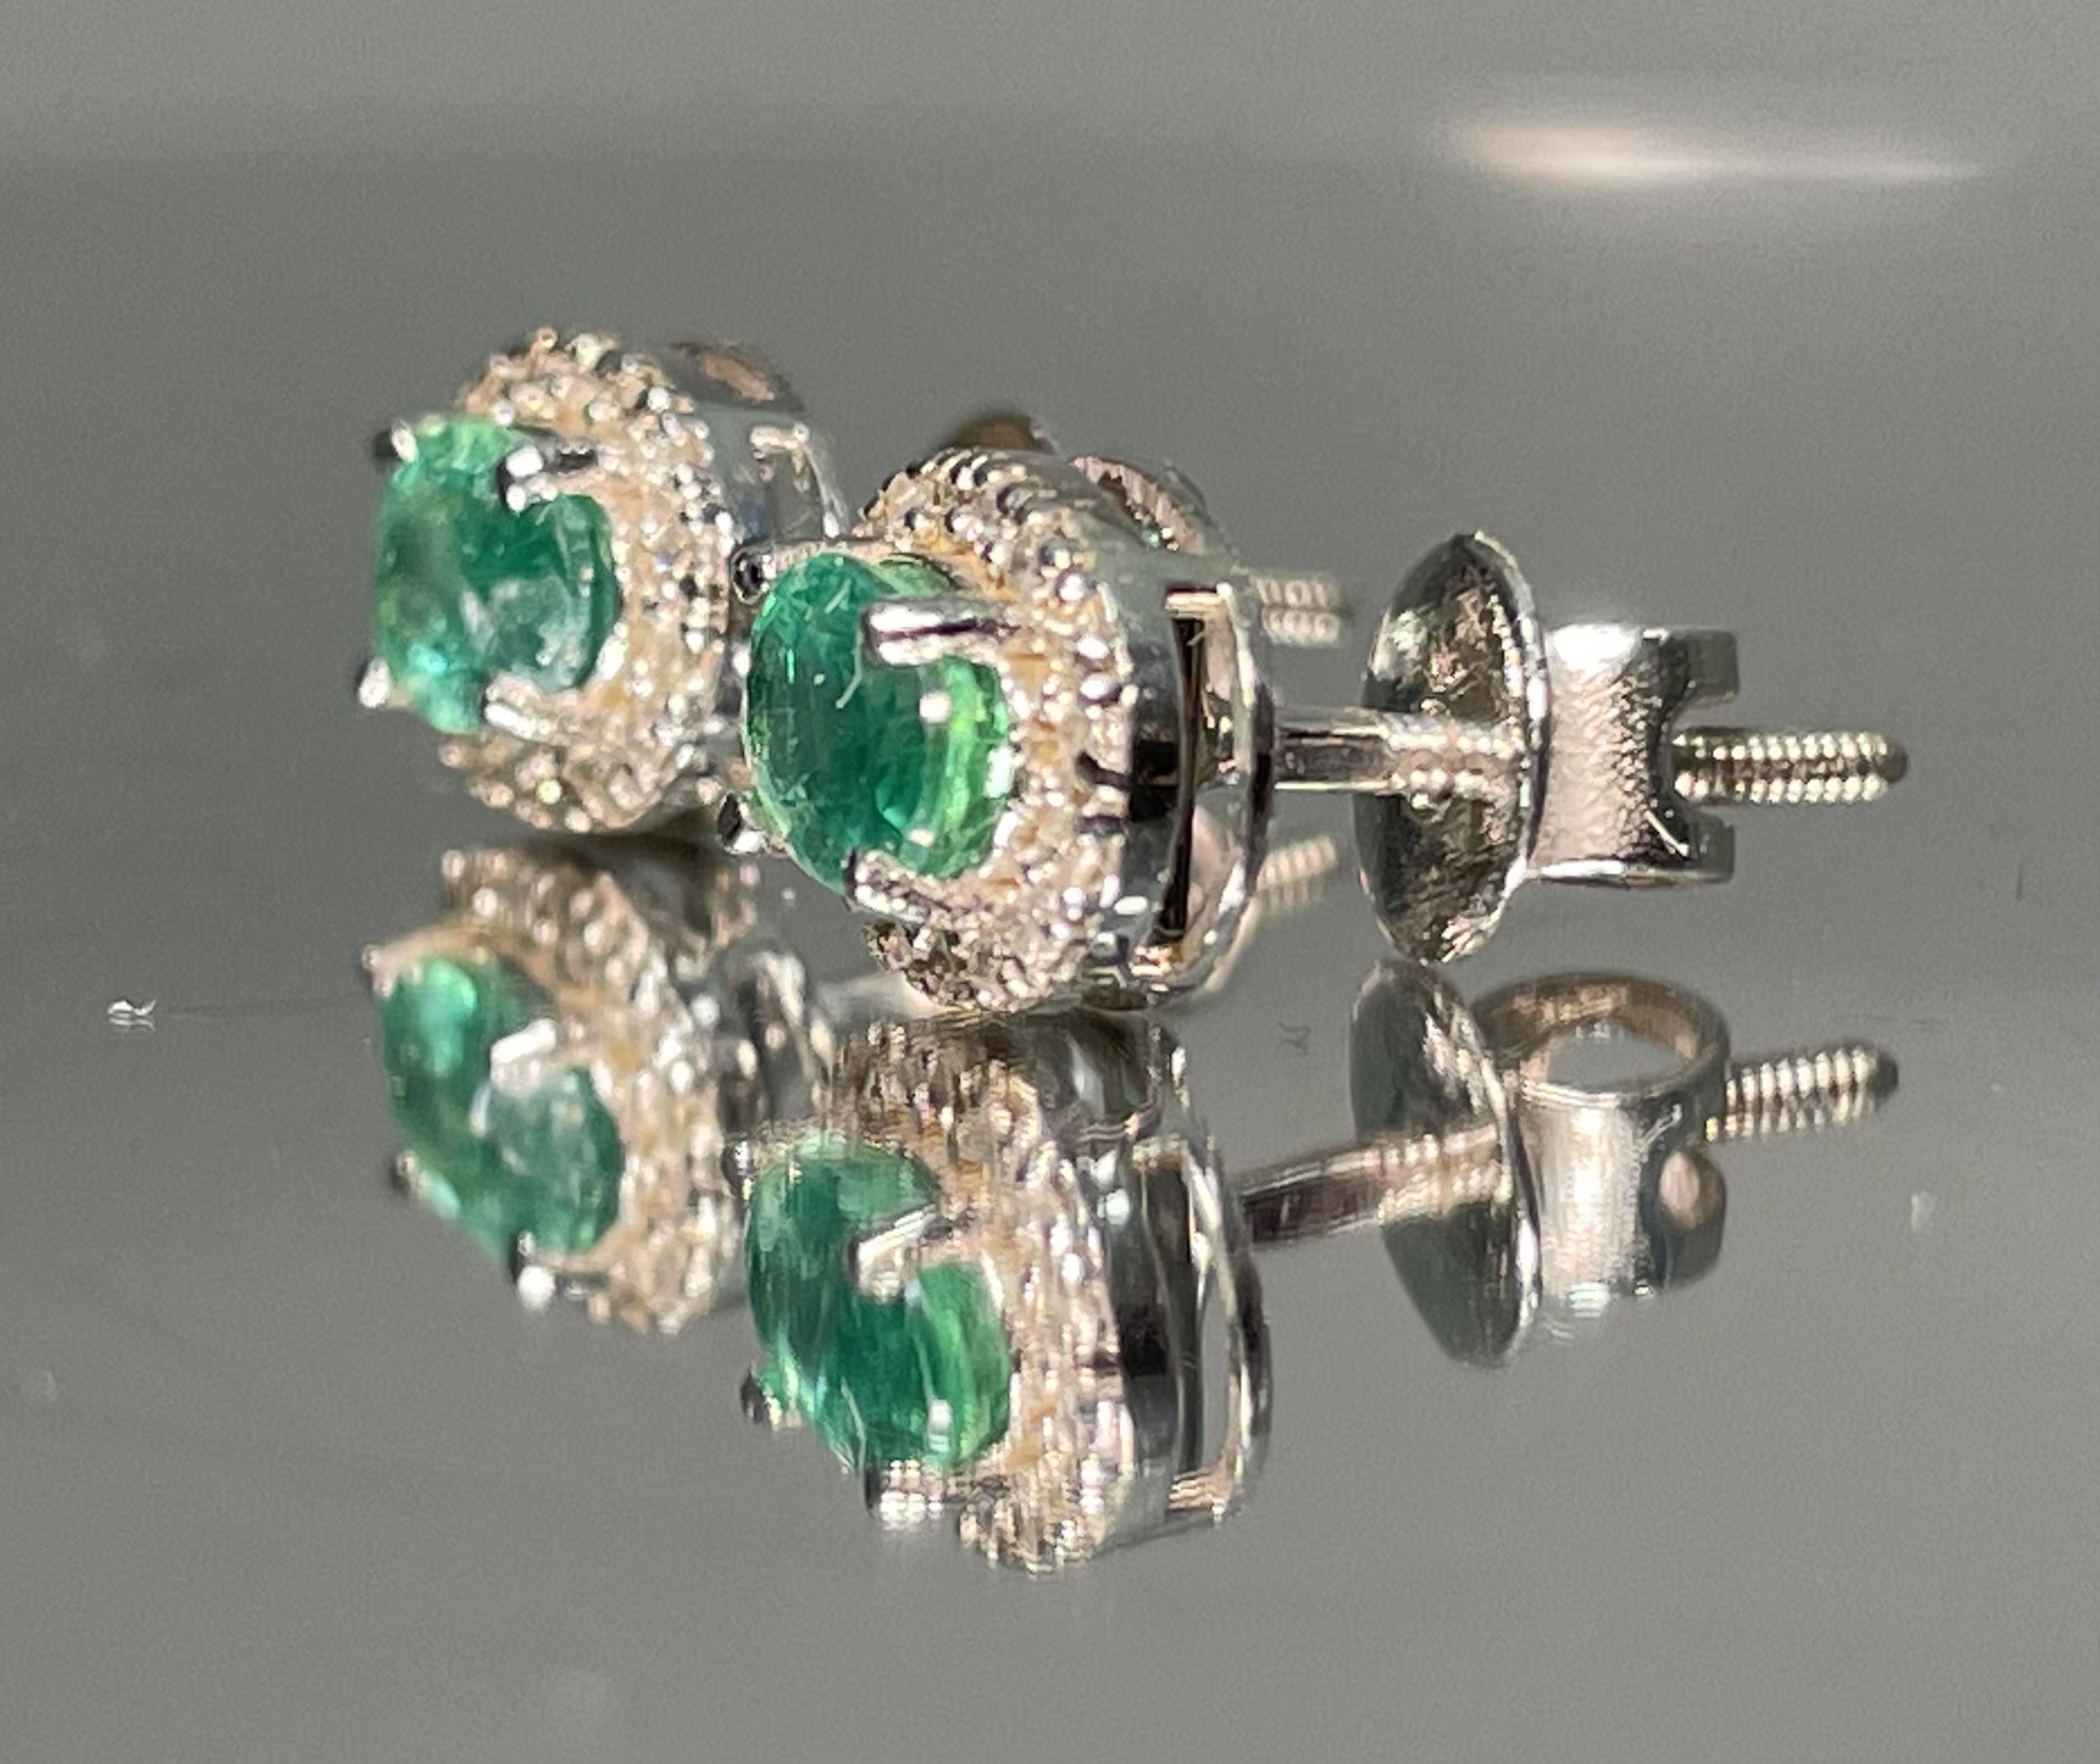 Beautiful Natural Emerald Halo Set Stud Earrings 18k White Gold - Image 4 of 7